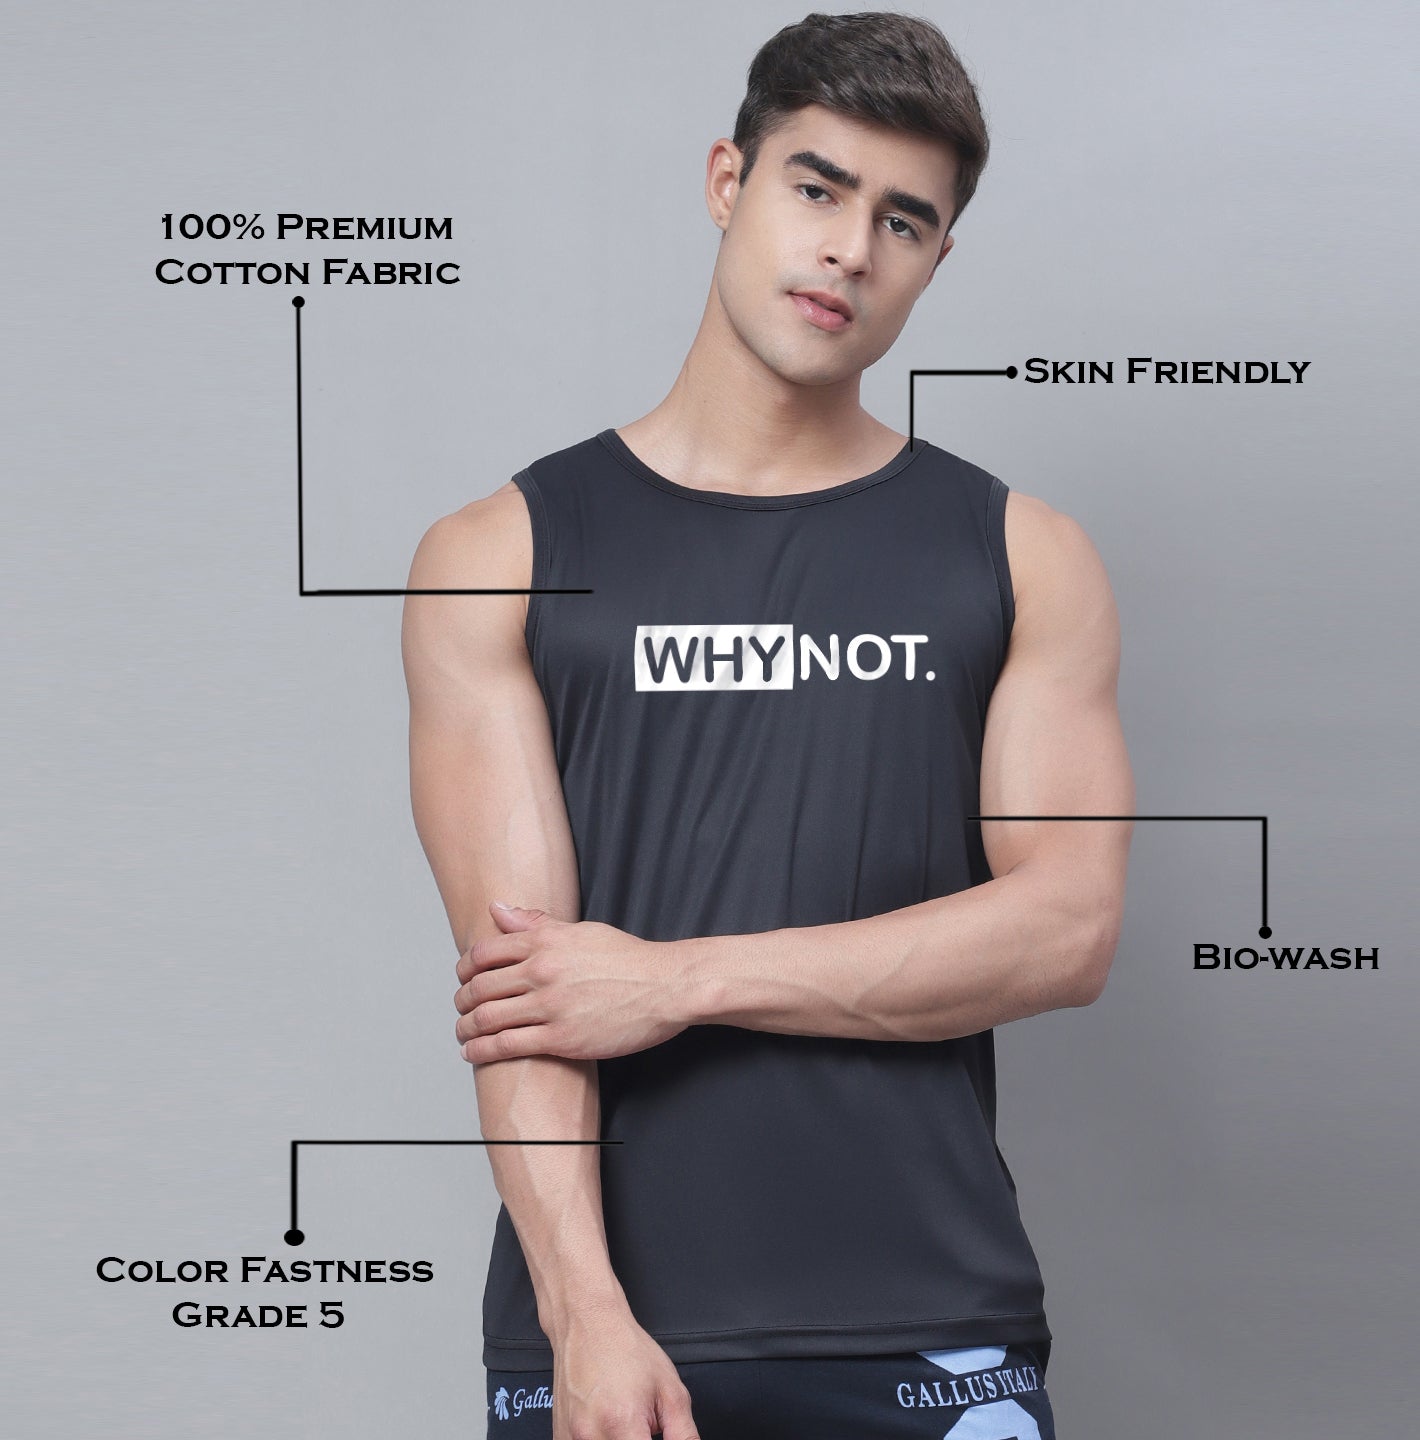 Sports Why Not Neck Training Gym Vest - Friskers